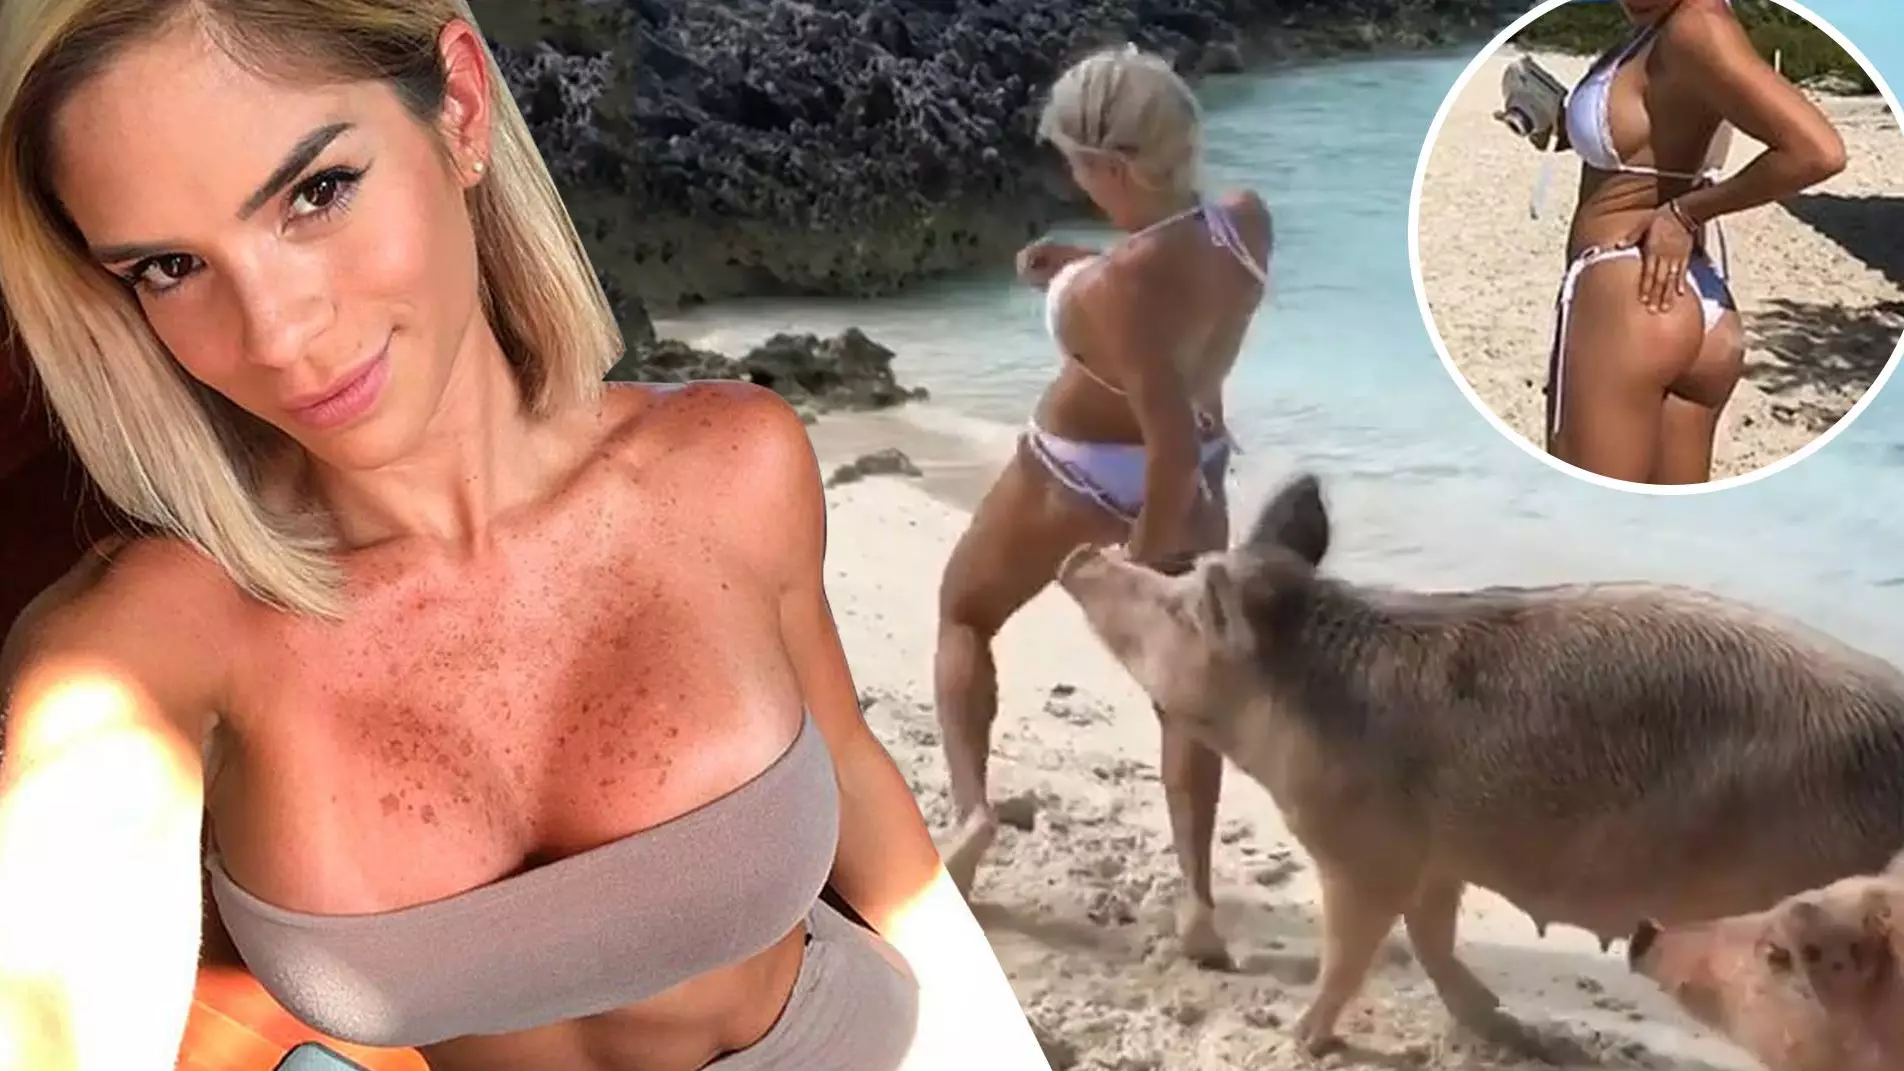 Instagram Fitness Model Michelle Lewin Bitten On The Bum By Pig In The Bahamas